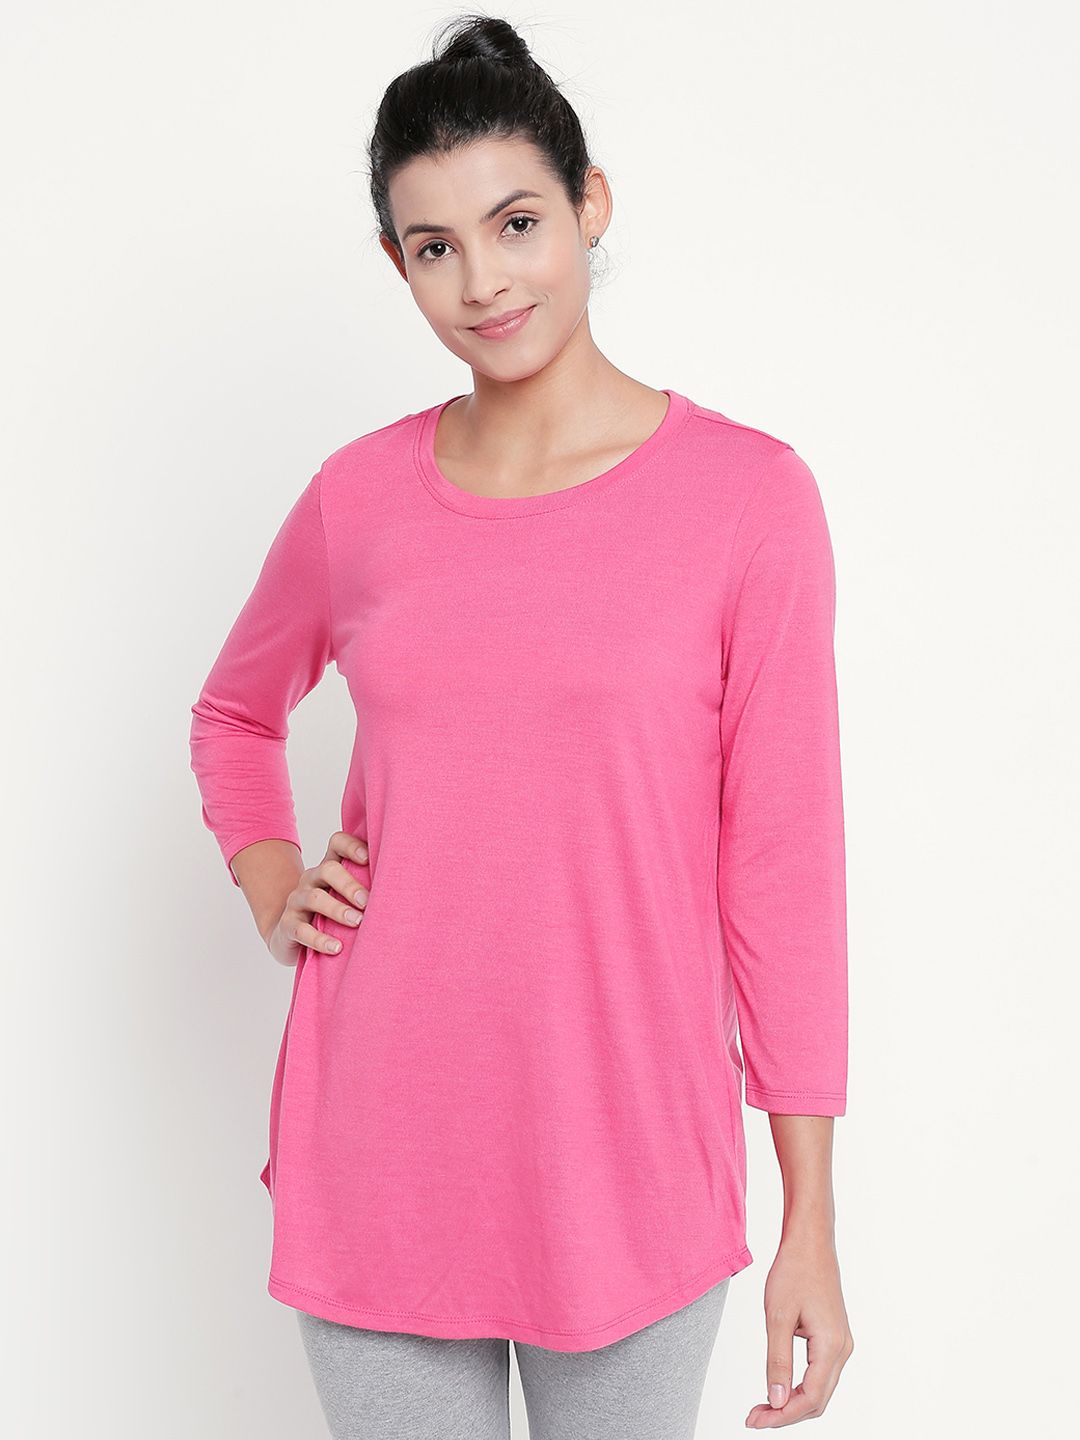 Dreamz by Pantaloons Women Pink Solid Round Neck Lounge T-shirt 205000005977771 Price in India